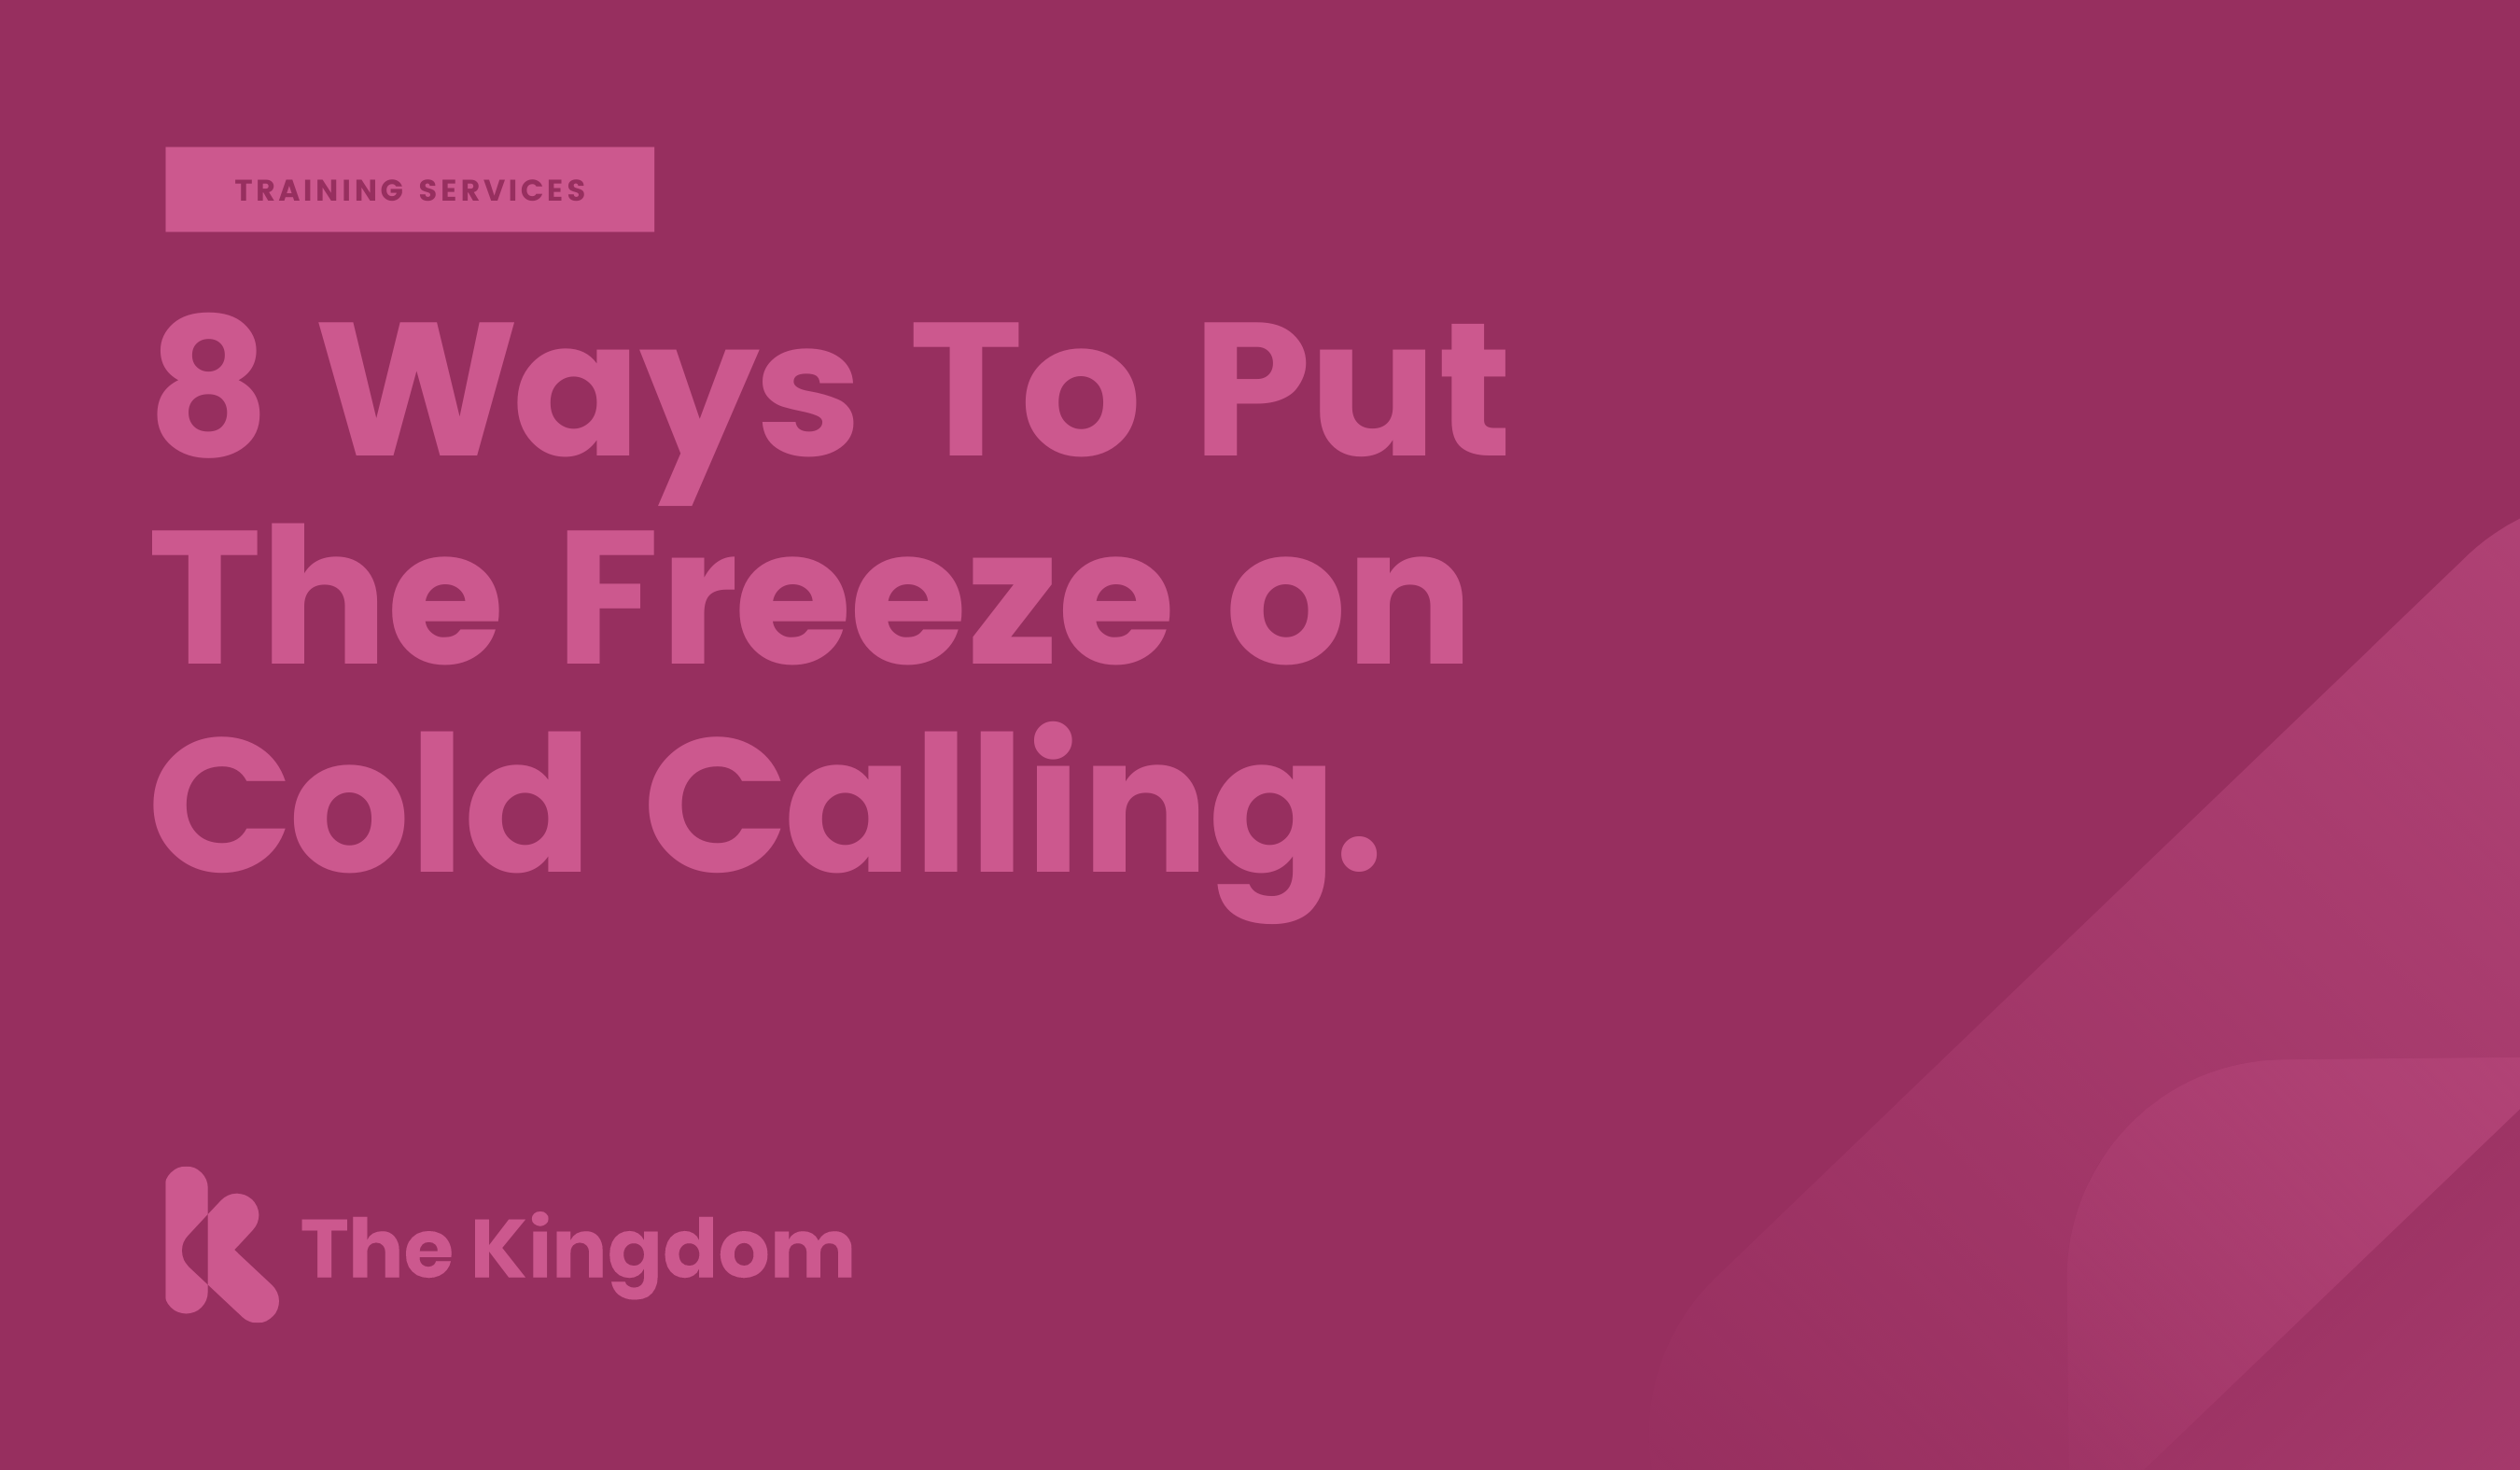 8 Ways To Put The Freeze on Cold Calling